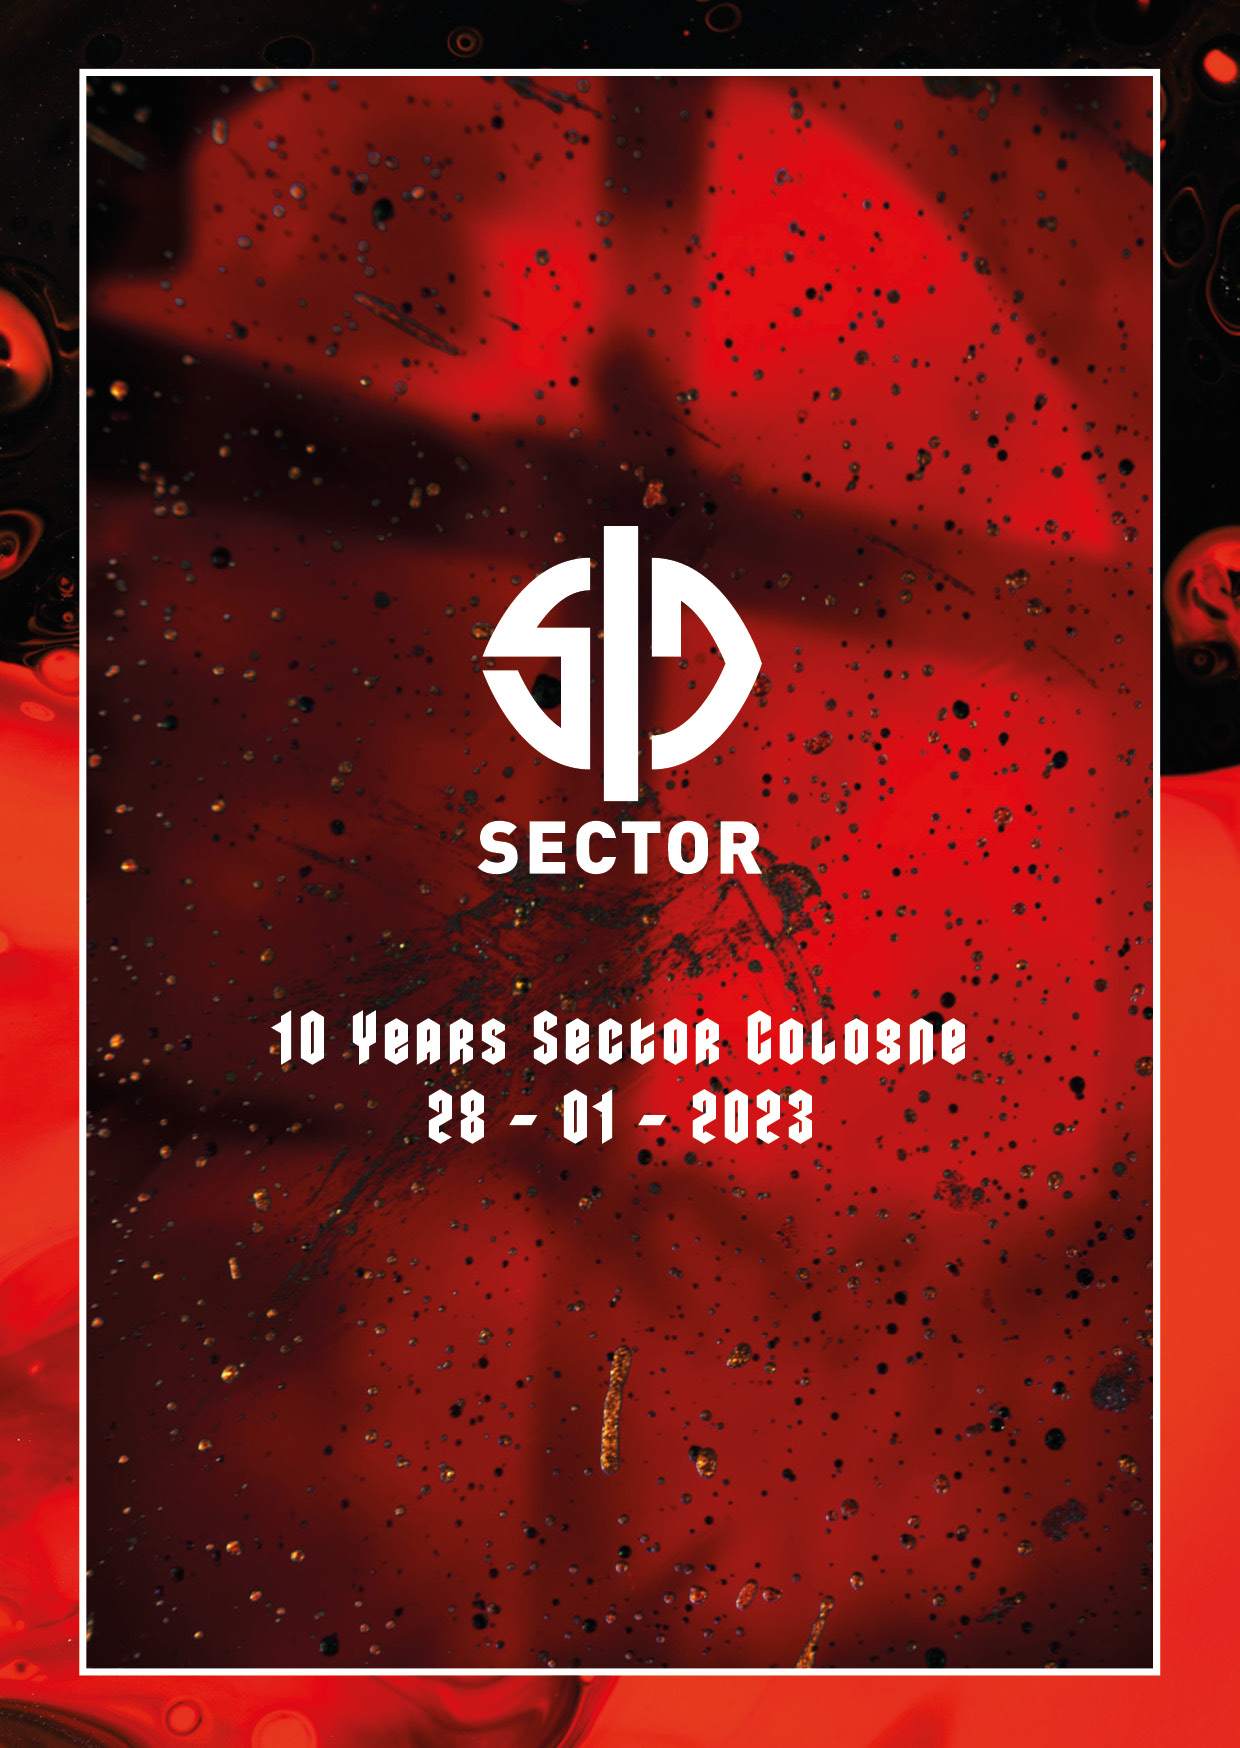 10 Years sector cologne Köln - フライヤー裏